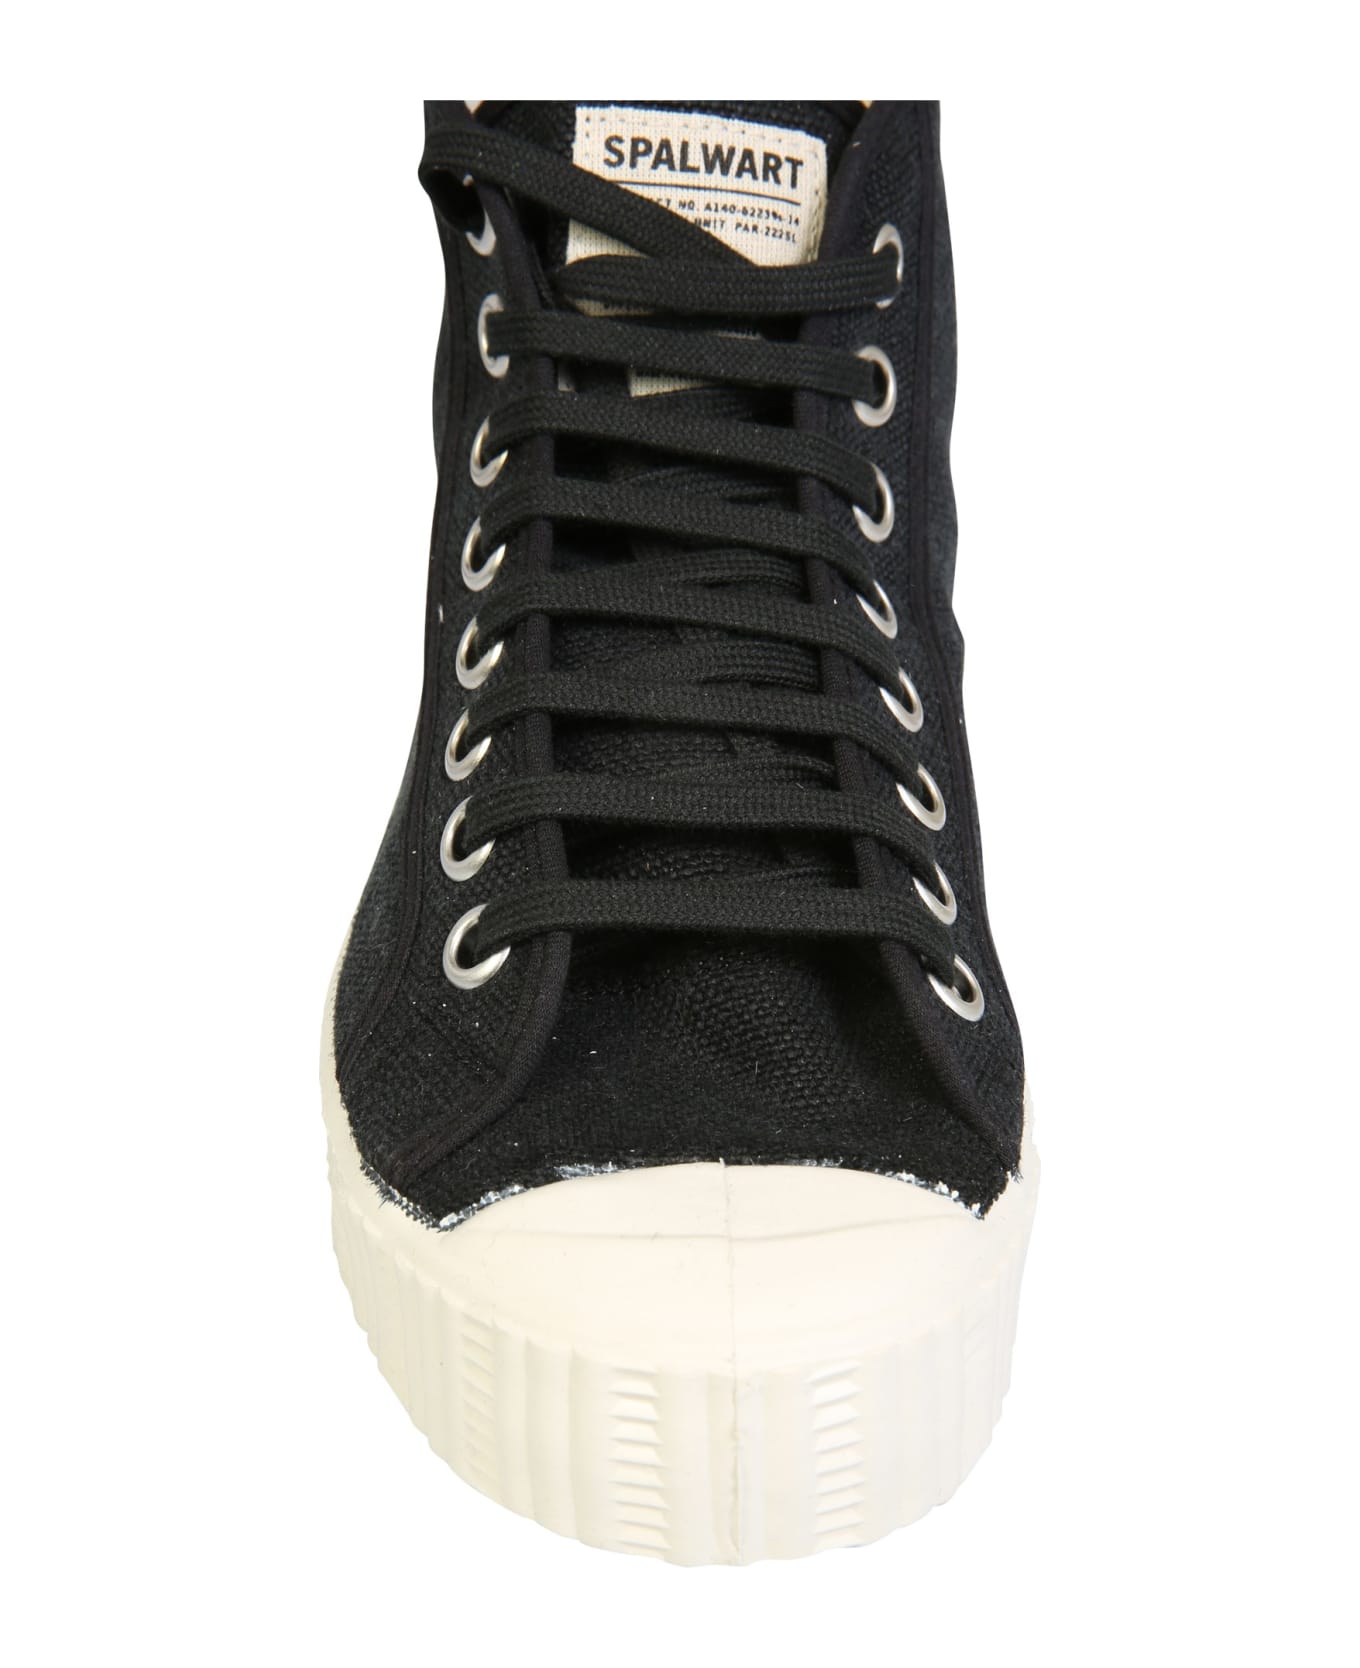 Spalwart High Model Special Sneakers - NERO